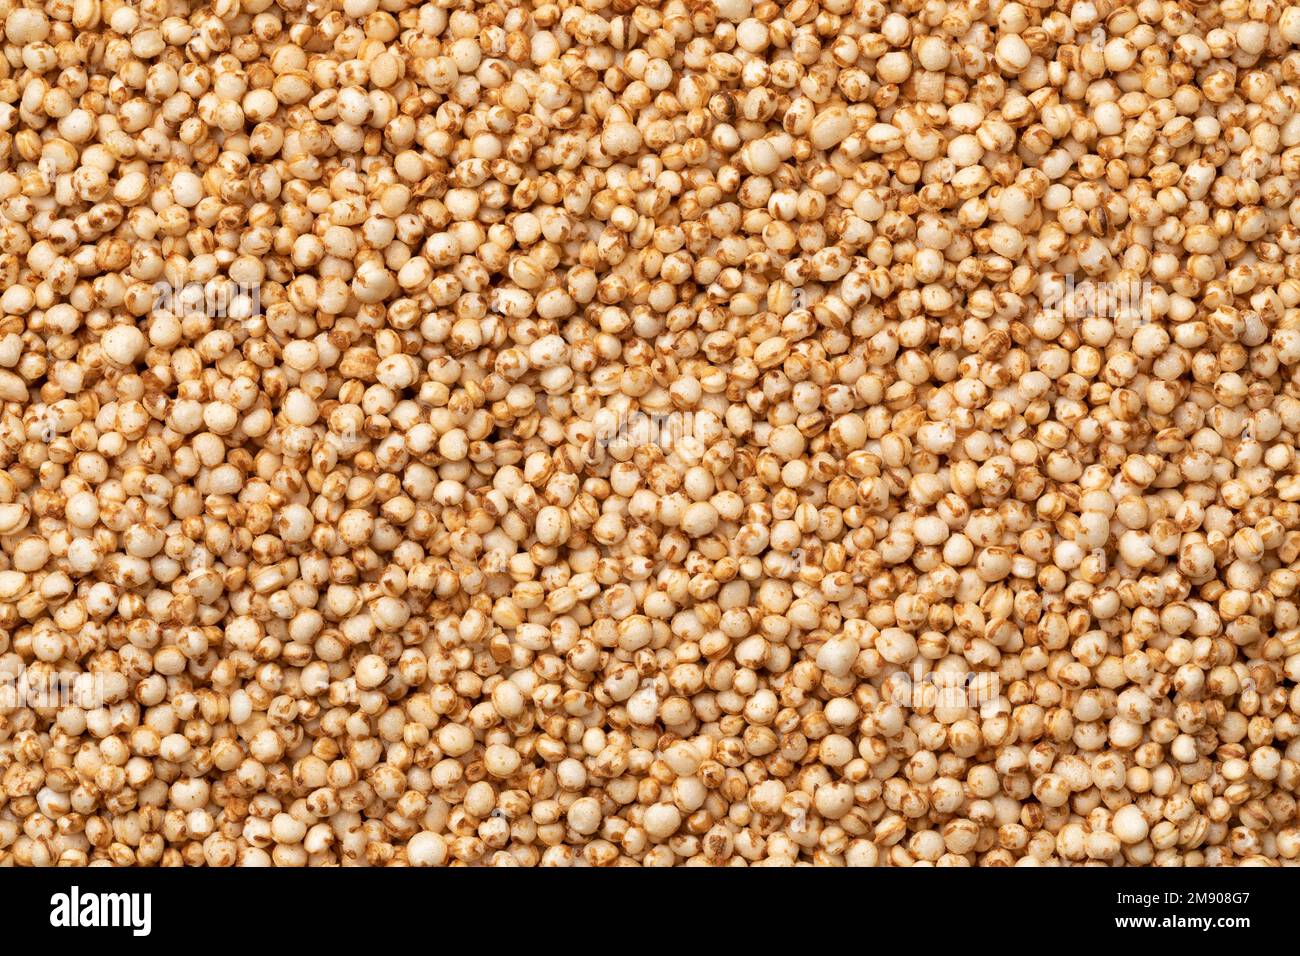 Puffed quinoa close up full frame as background Stock Photo